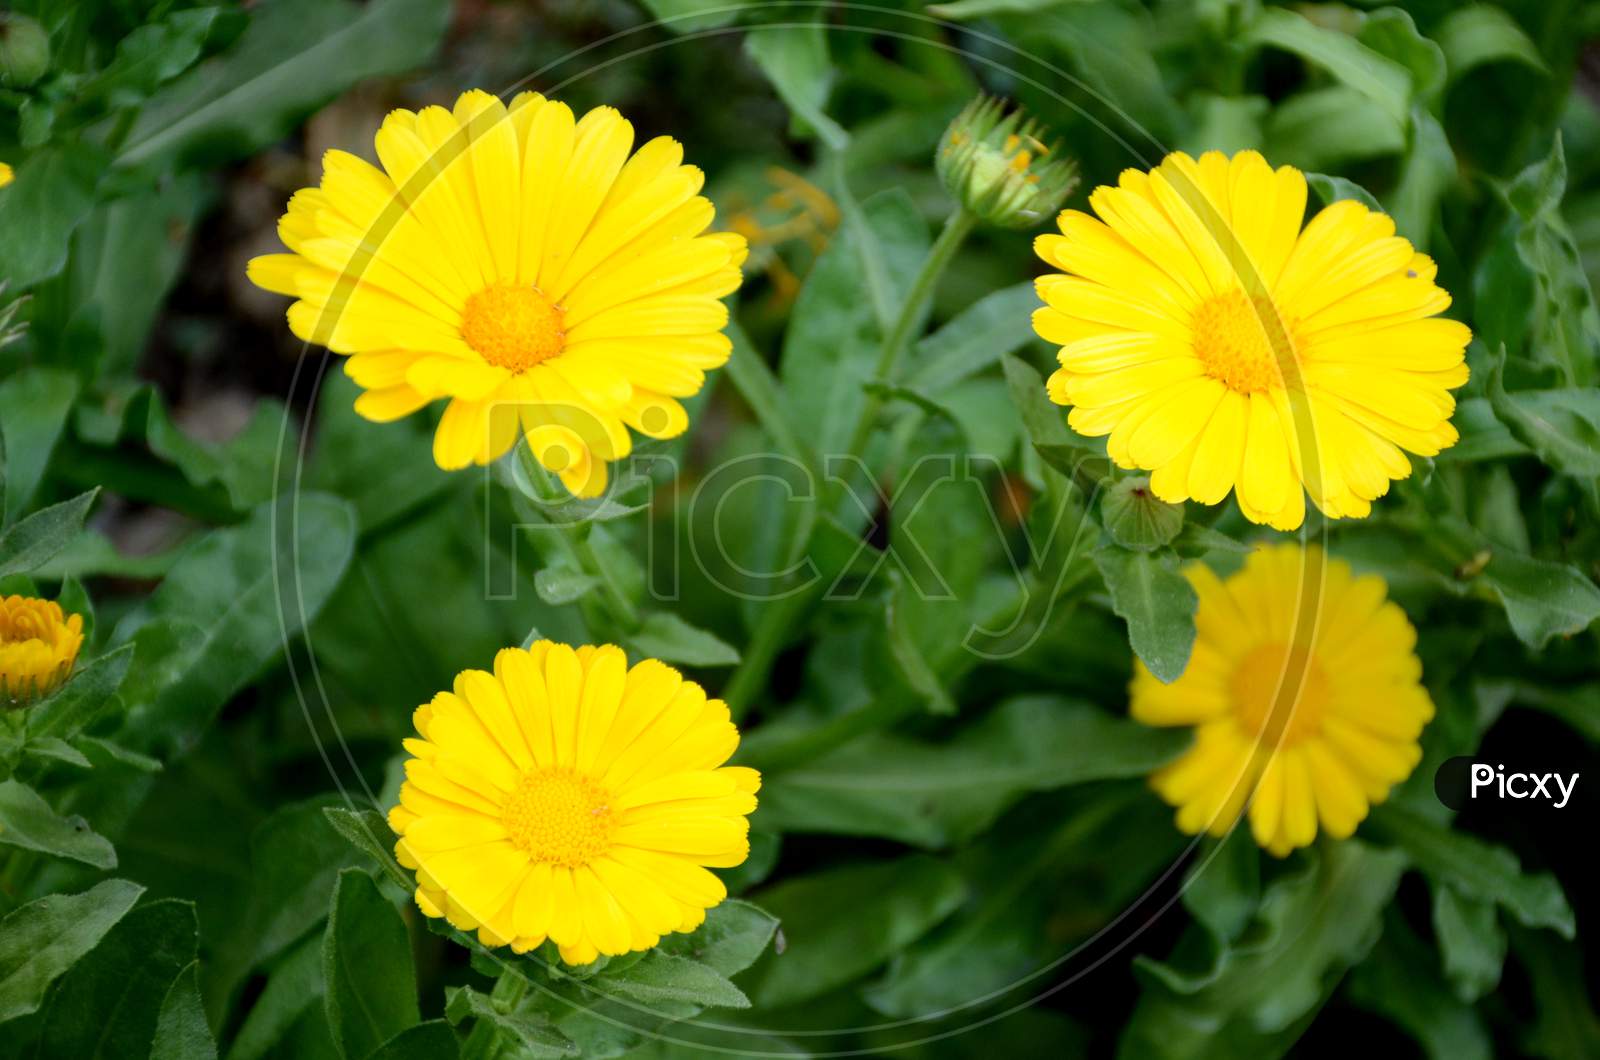 Bunch The Beautiful Calendula Yellow Flower With Leaves And Plant In The Garden.